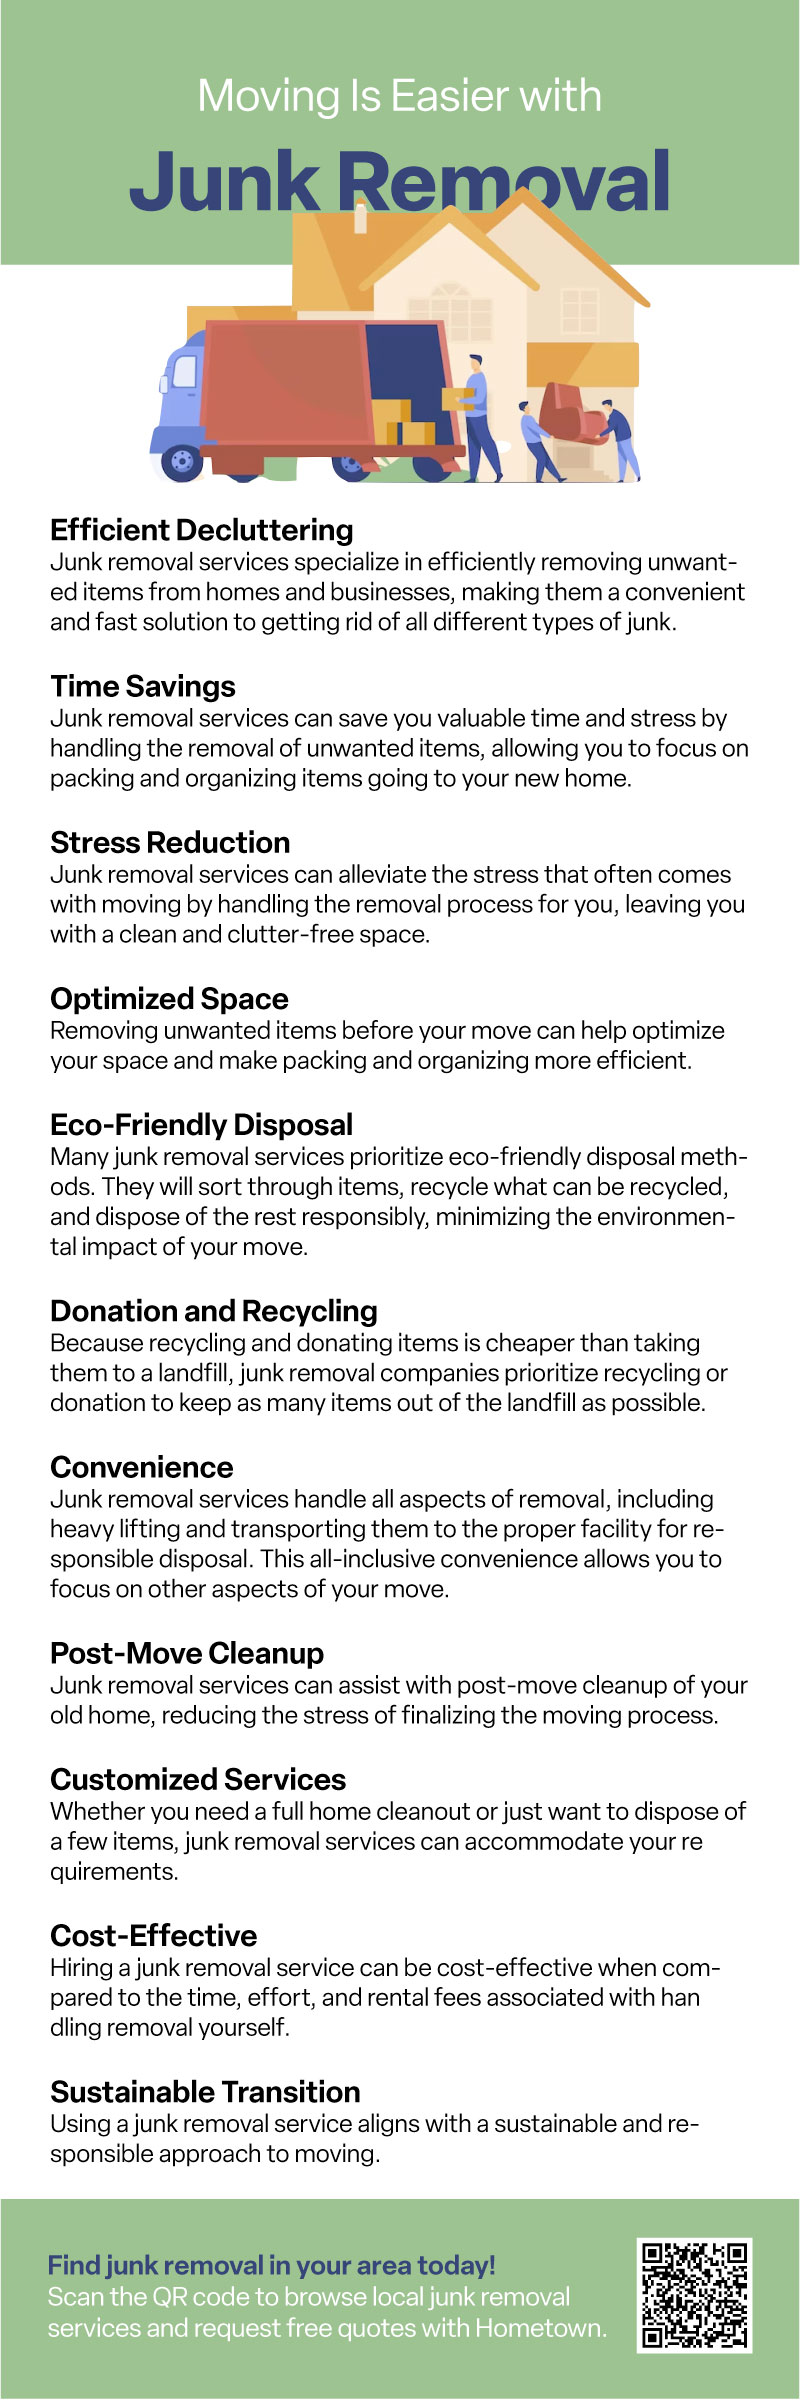 how moving is easier with junk removal infographic